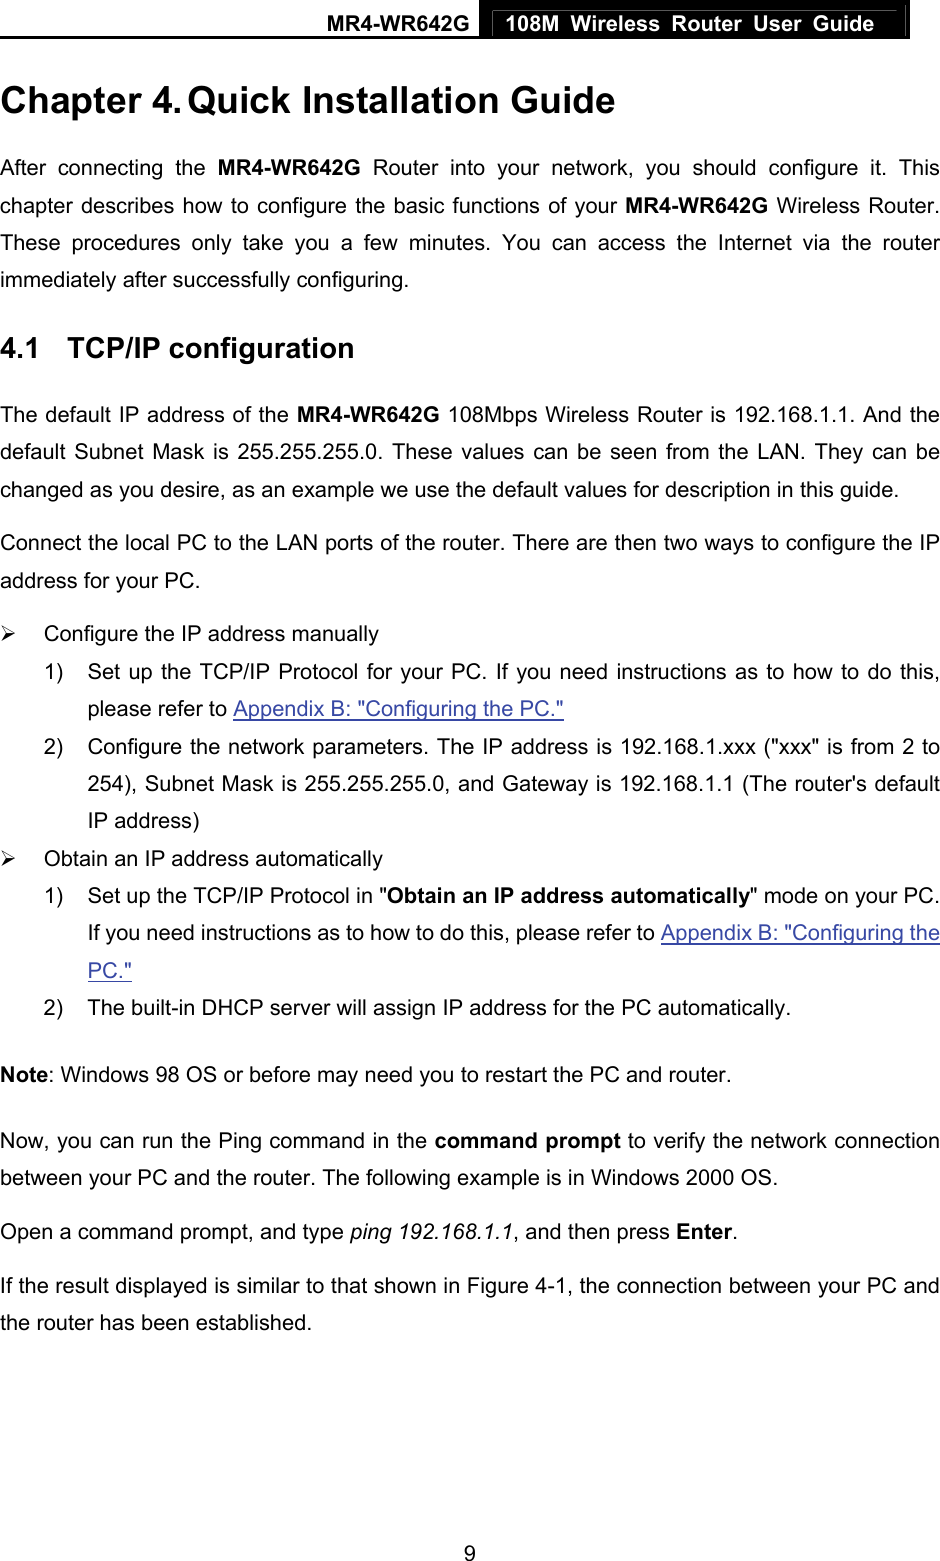 MR4-WR642G 108M Wireless Router User Guide   9Chapter 4. Quick Installation Guide After connecting the MR4-WR642G Router into your network, you should configure it. This chapter describes how to configure the basic functions of your MR4-WR642G Wireless Router. These procedures only take you a few minutes. You can access the Internet via the router immediately after successfully configuring. 4.1  TCP/IP configuration The default IP address of the MR4-WR642G 108Mbps Wireless Router is 192.168.1.1. And the default Subnet Mask is 255.255.255.0. These values can be seen from the LAN. They can be changed as you desire, as an example we use the default values for description in this guide. Connect the local PC to the LAN ports of the router. There are then two ways to configure the IP address for your PC. ¾  Configure the IP address manually 1)  Set up the TCP/IP Protocol for your PC. If you need instructions as to how to do this, please refer to Appendix B: &quot;Configuring the PC.&quot; 2)  Configure the network parameters. The IP address is 192.168.1.xxx (&quot;xxx&quot; is from 2 to 254), Subnet Mask is 255.255.255.0, and Gateway is 192.168.1.1 (The router&apos;s default IP address) ¾  Obtain an IP address automatically 1)  Set up the TCP/IP Protocol in &quot;Obtain an IP address automatically&quot; mode on your PC. If you need instructions as to how to do this, please refer to Appendix B: &quot;Configuring the PC.&quot; 2)  The built-in DHCP server will assign IP address for the PC automatically. Note: Windows 98 OS or before may need you to restart the PC and router. Now, you can run the Ping command in the command prompt to verify the network connection between your PC and the router. The following example is in Windows 2000 OS. Open a command prompt, and type ping 192.168.1.1, and then press Enter. If the result displayed is similar to that shown in Figure 4-1, the connection between your PC and the router has been established.   